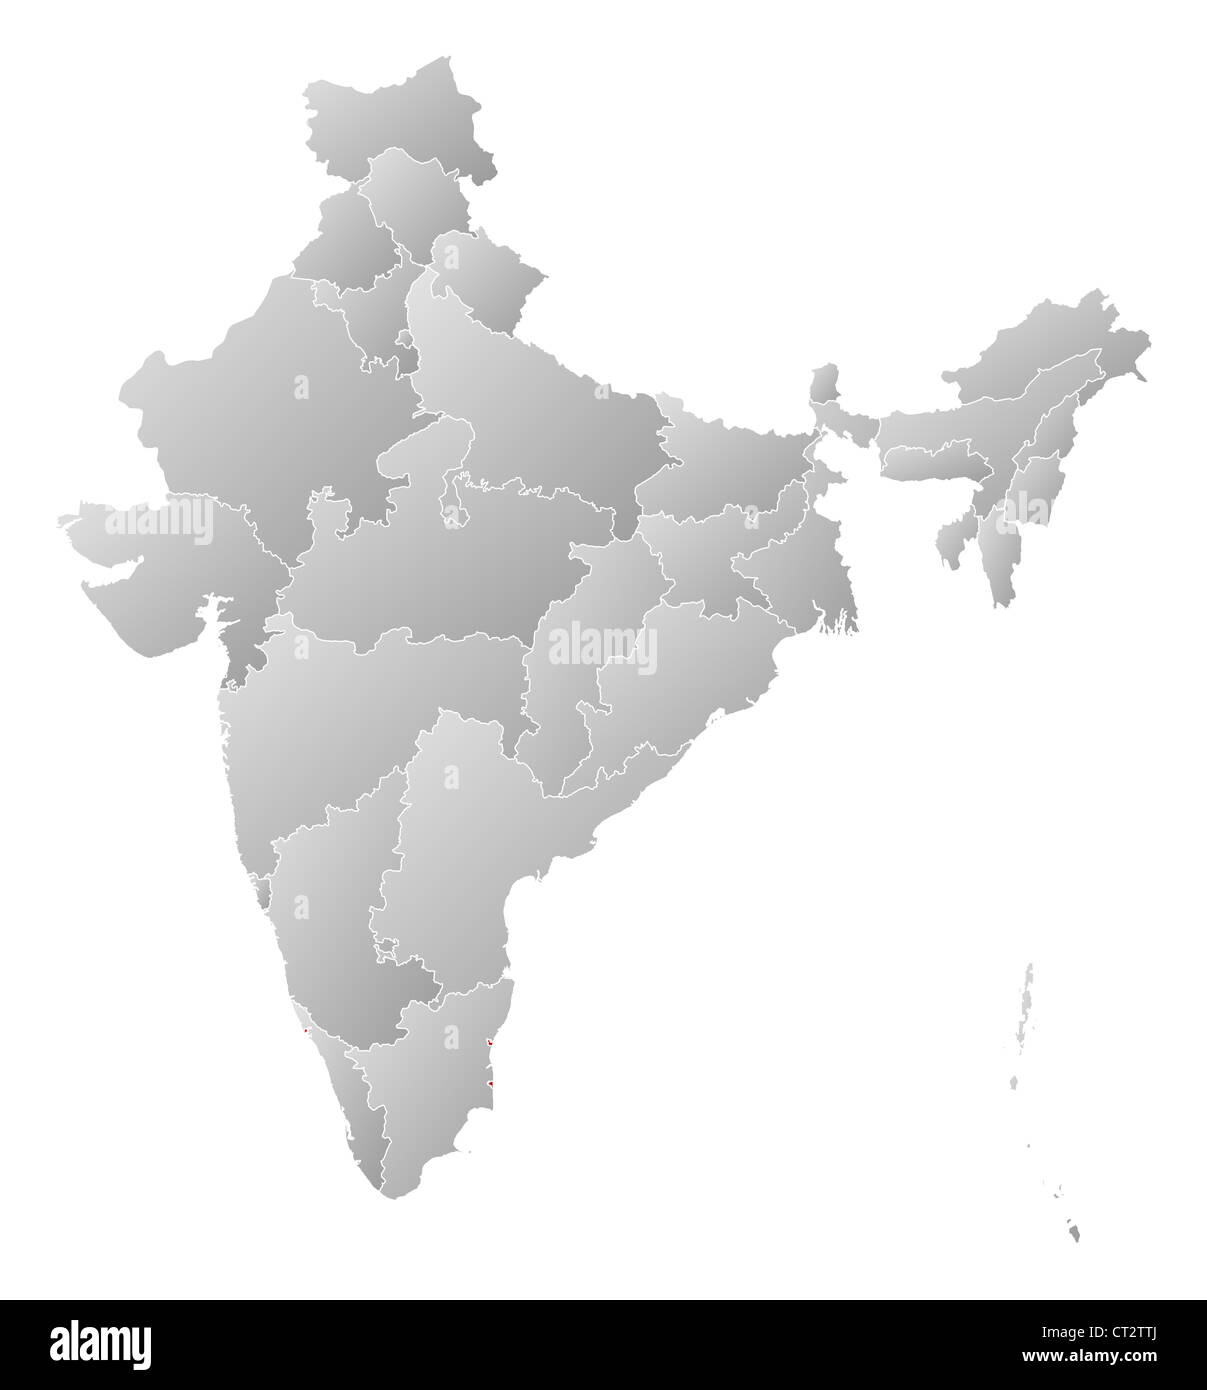 Political map of India with the several states where Puducherry is highlighted. Stock Photo